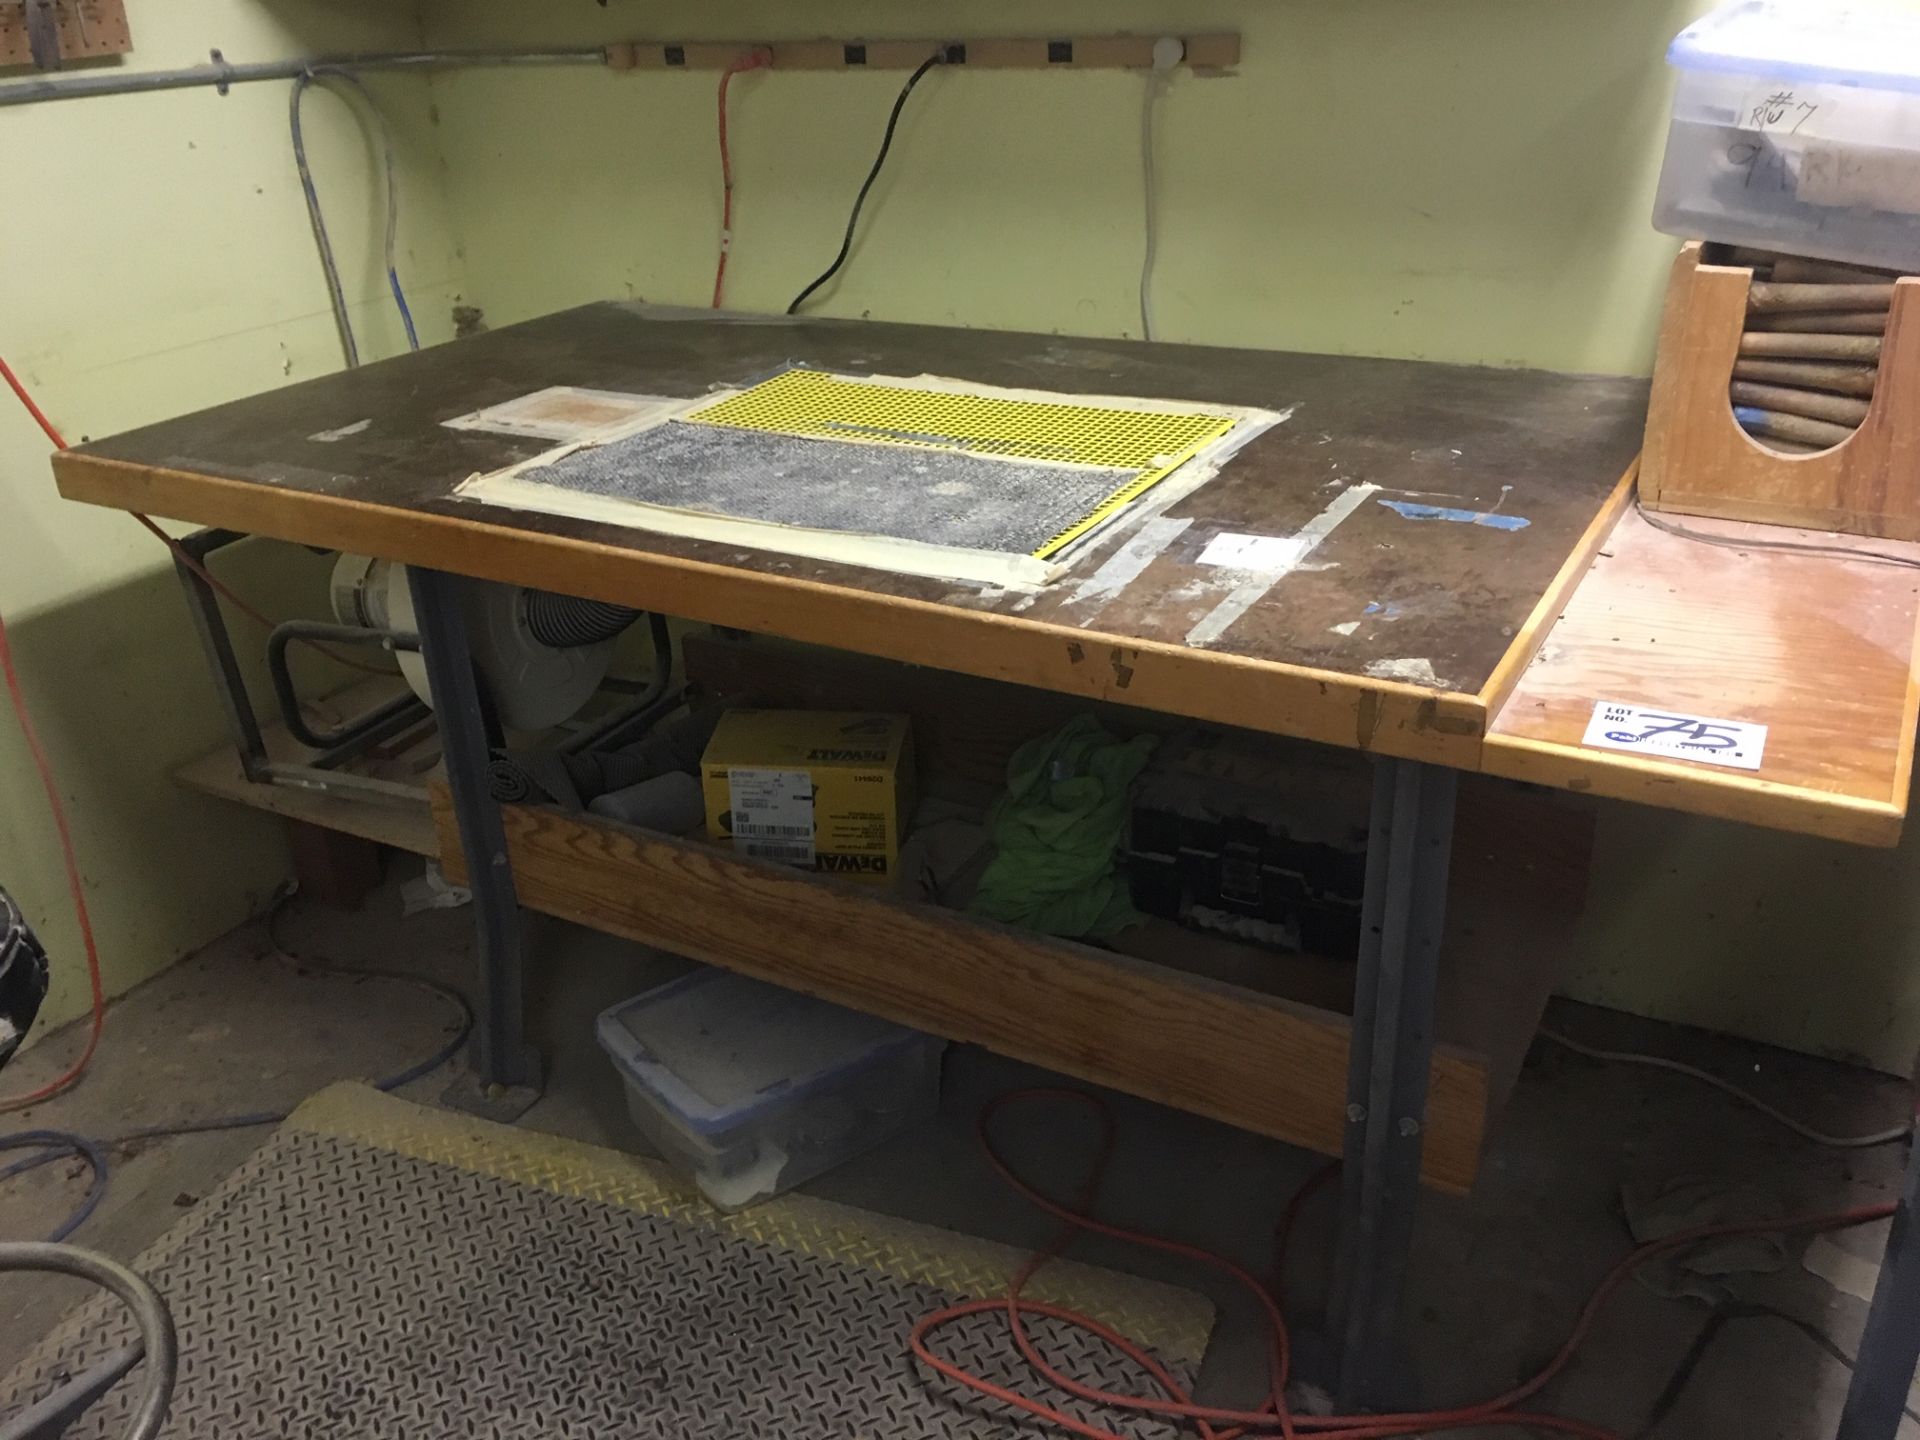 6' x 3' Vacuum Utility table with Jet Dust Collector